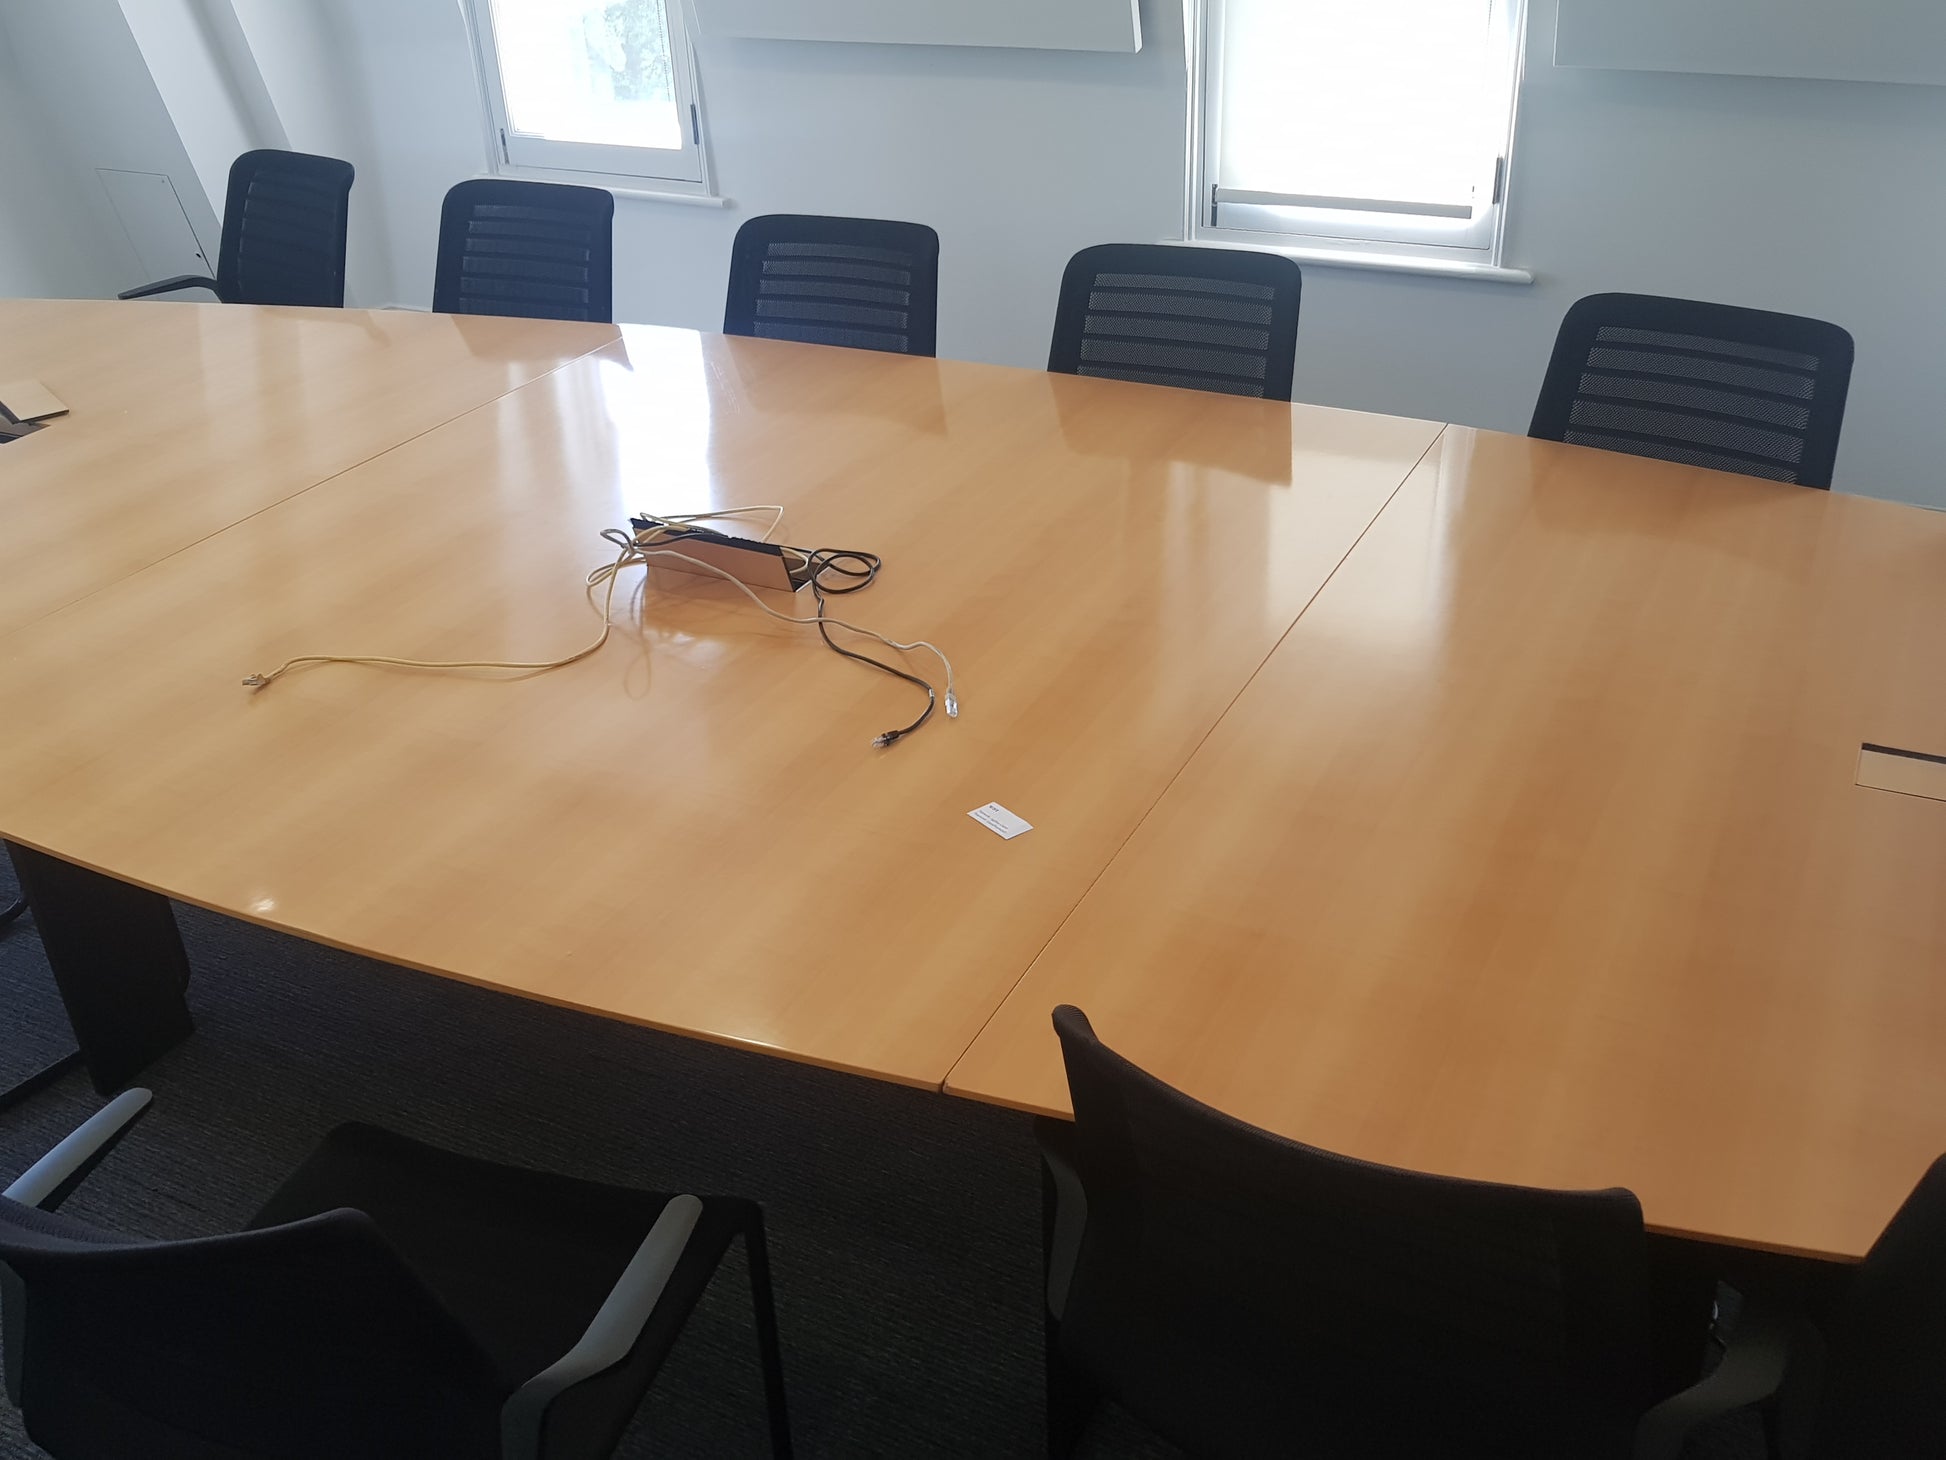 extra-large-office-boardroom-conference-table-middle